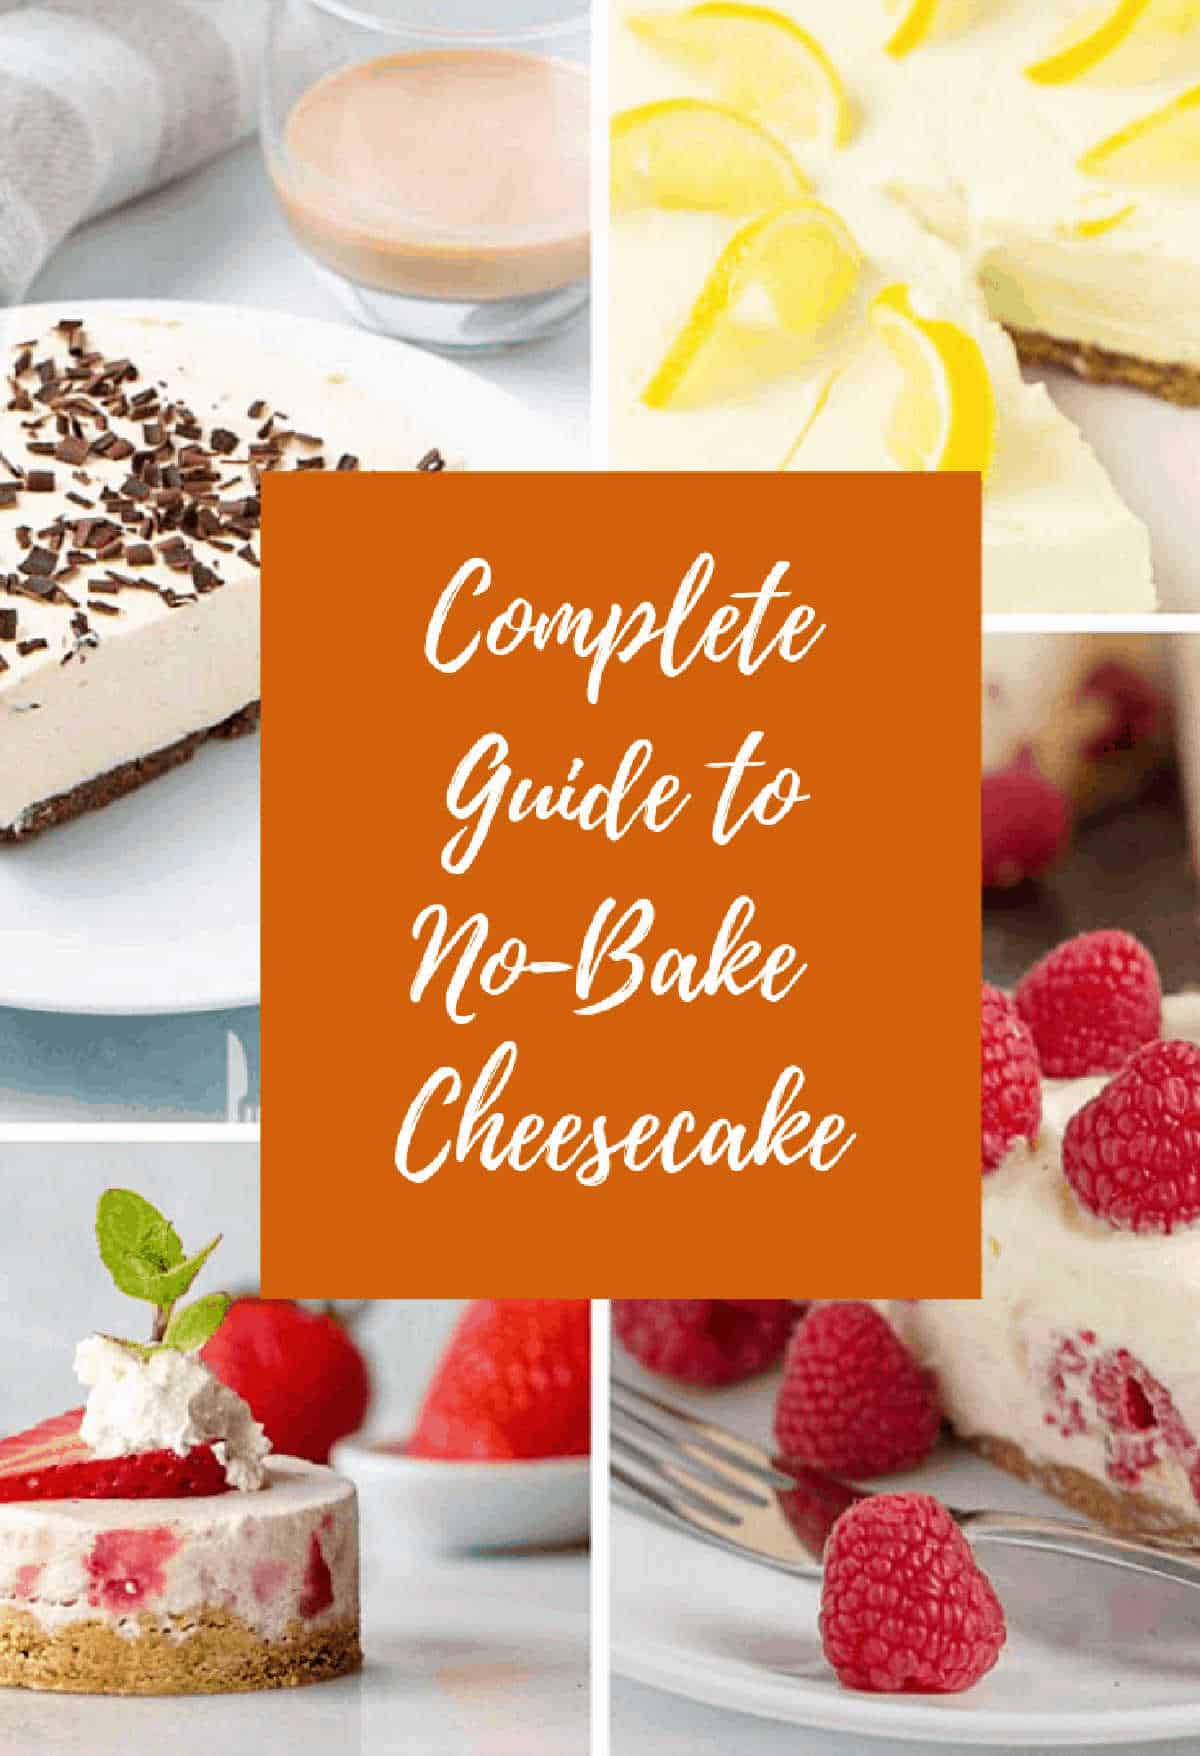 Banner for no-bake cheesecake guide with 4 images and central brown and white text overlay.